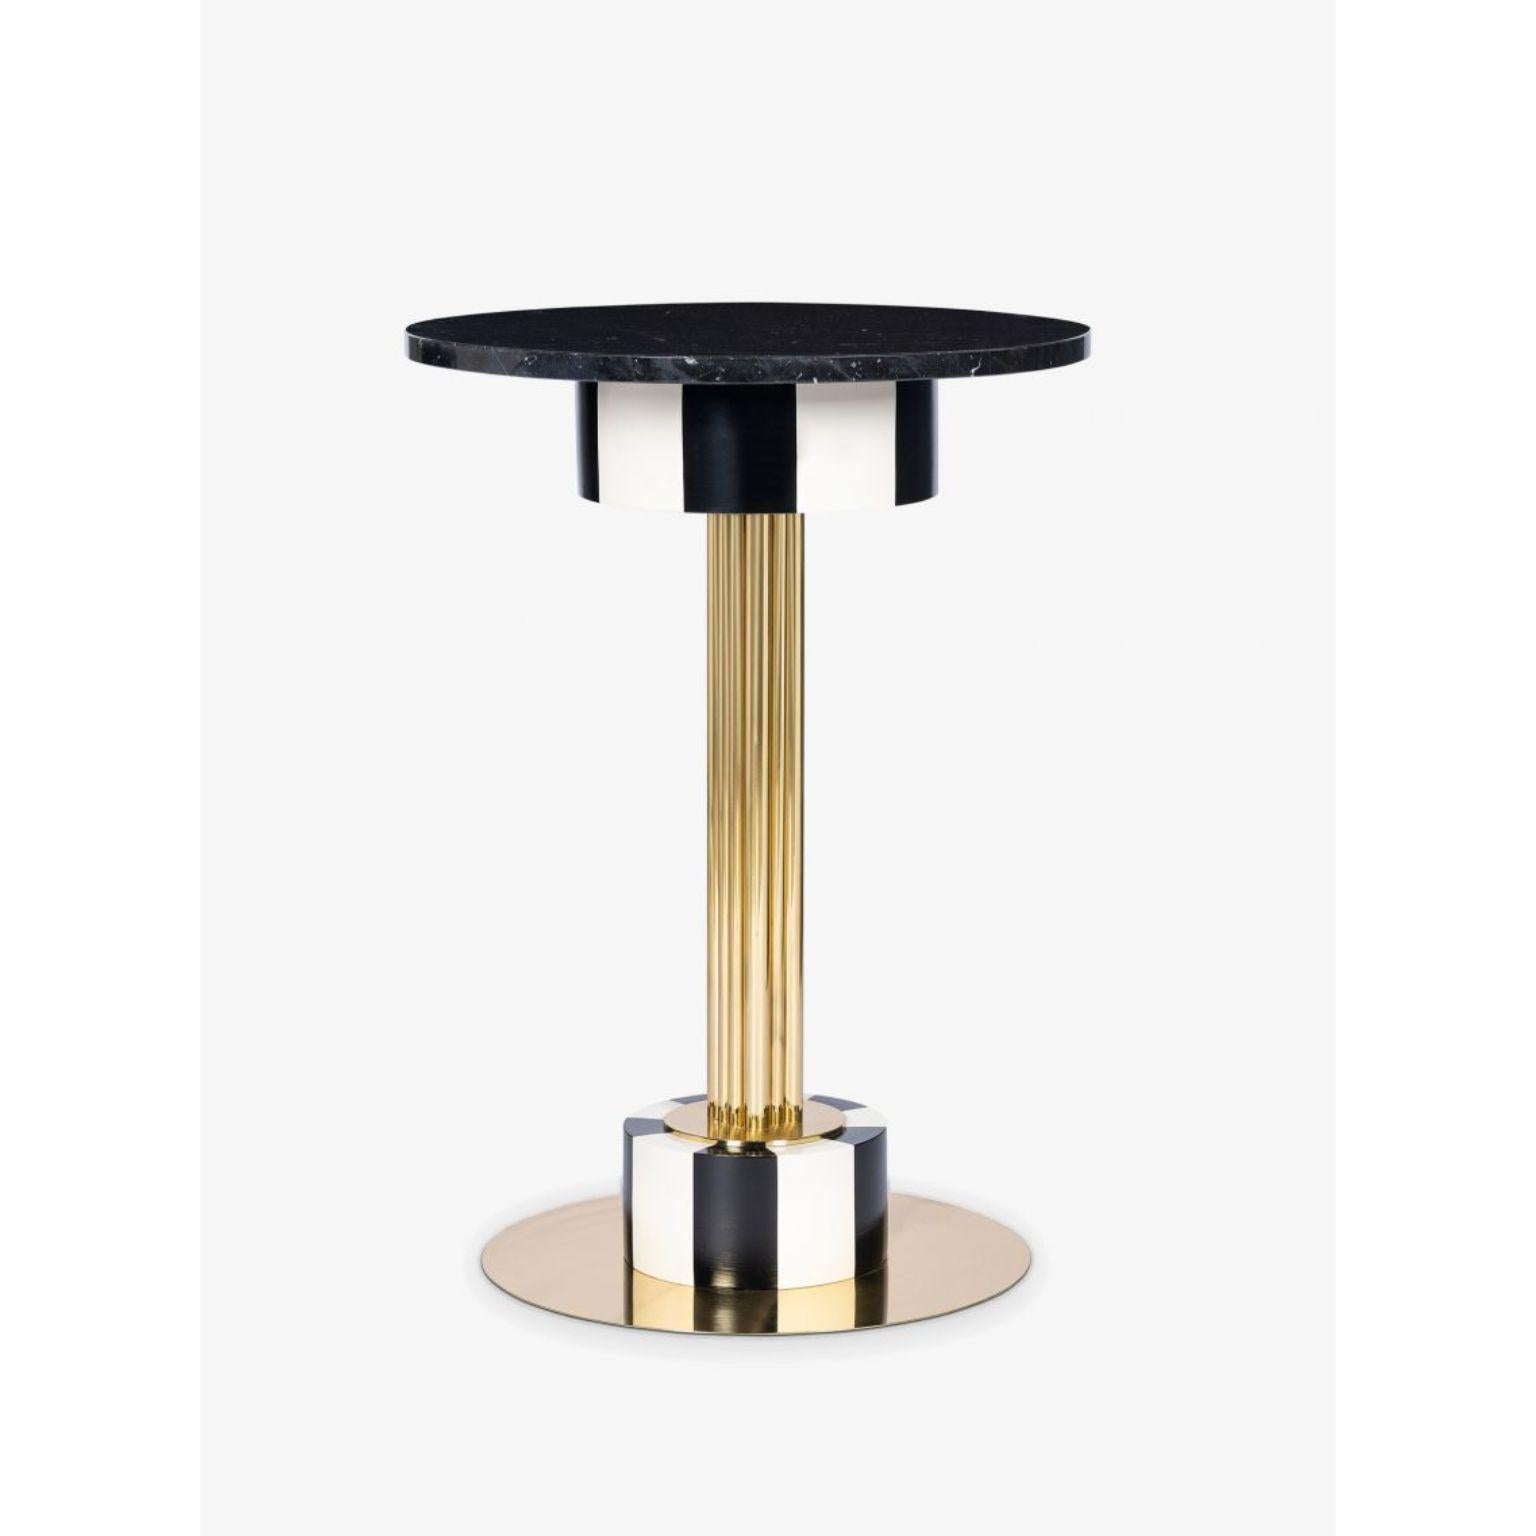 Julia marble table by Royal Stranger
Dimensions: width 75cm, depth 75cm and height 105cm 


Inspired by the femininity and using bold and vibrant color schemes, this collection is meant to be positive and happy, celebrating the inner beauty,